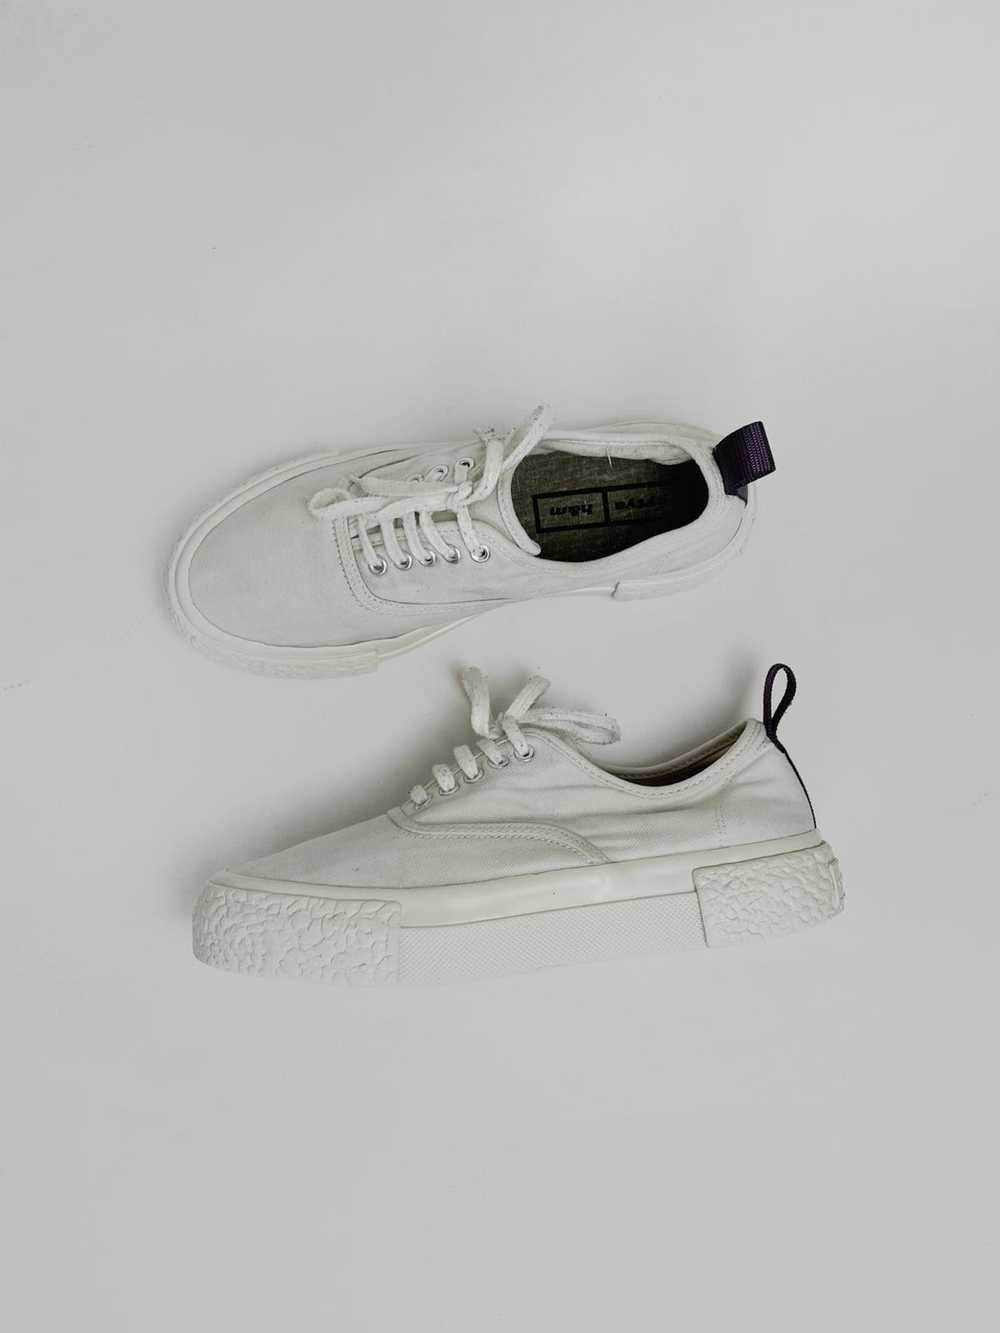 Eytys × H&M Eytys x H&M sneakers size: 38 - image 1